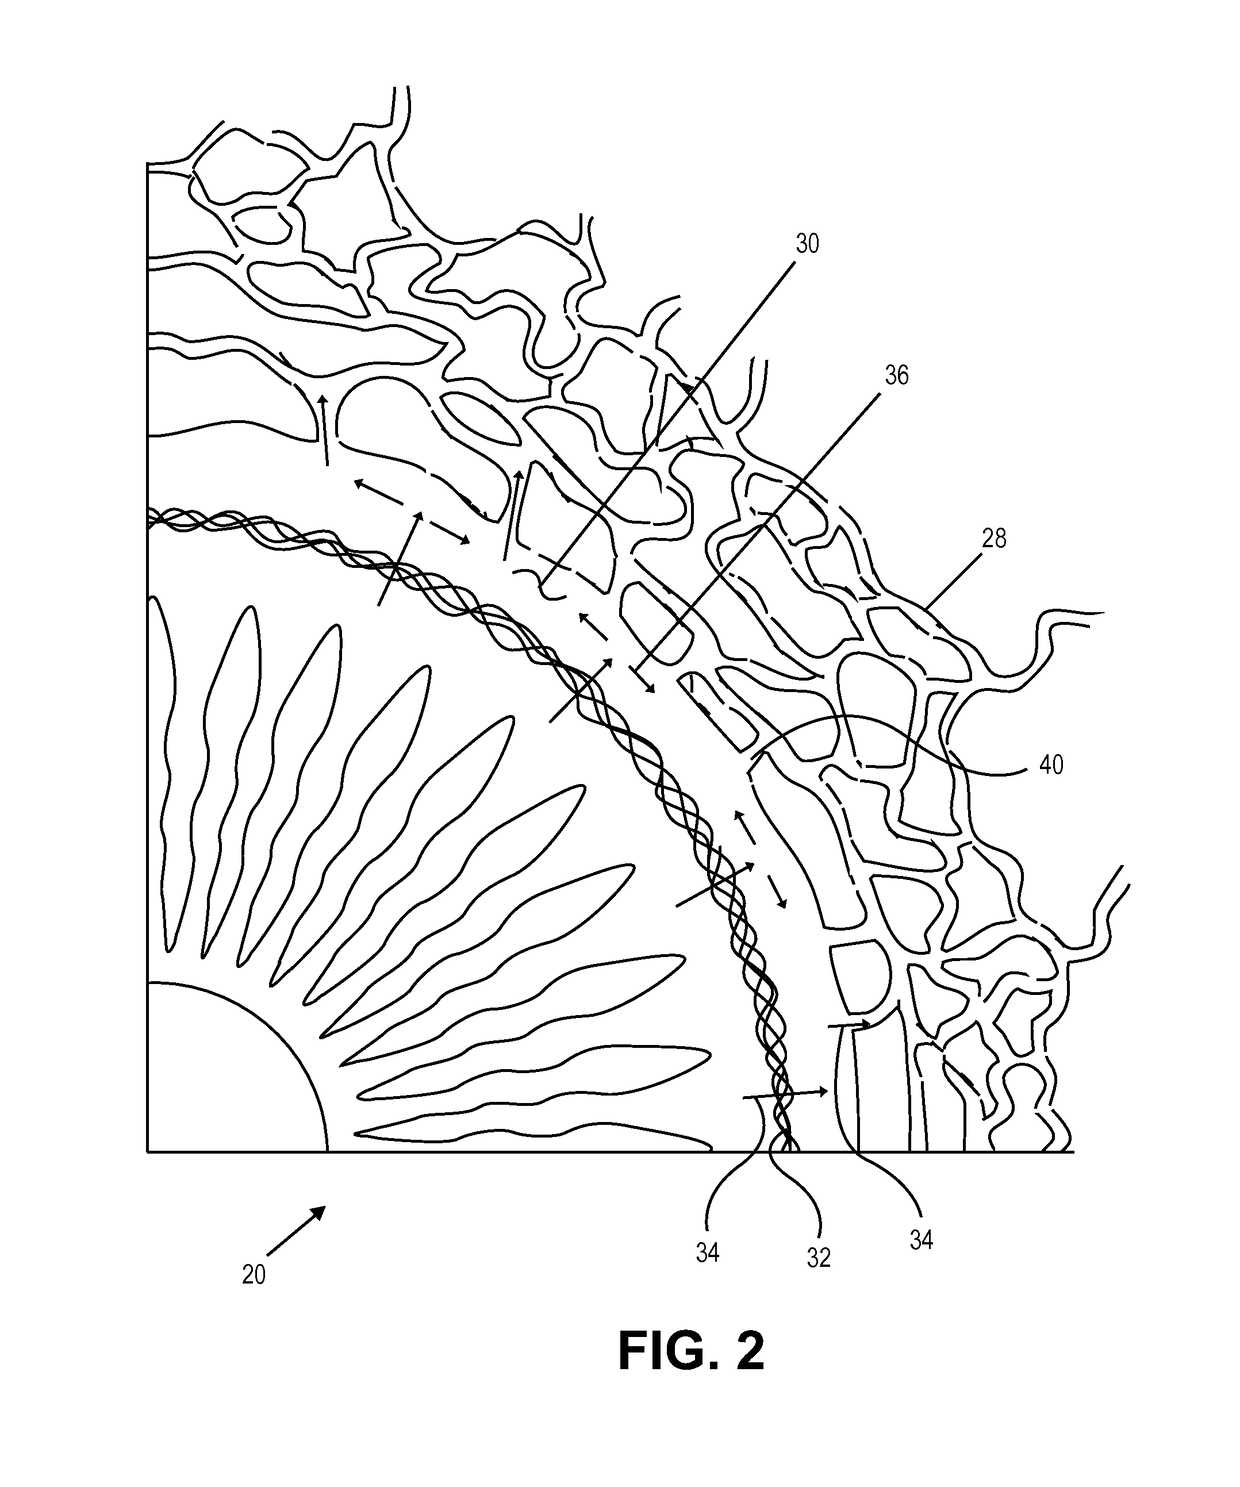 Single operator device for delivering an ocular implant